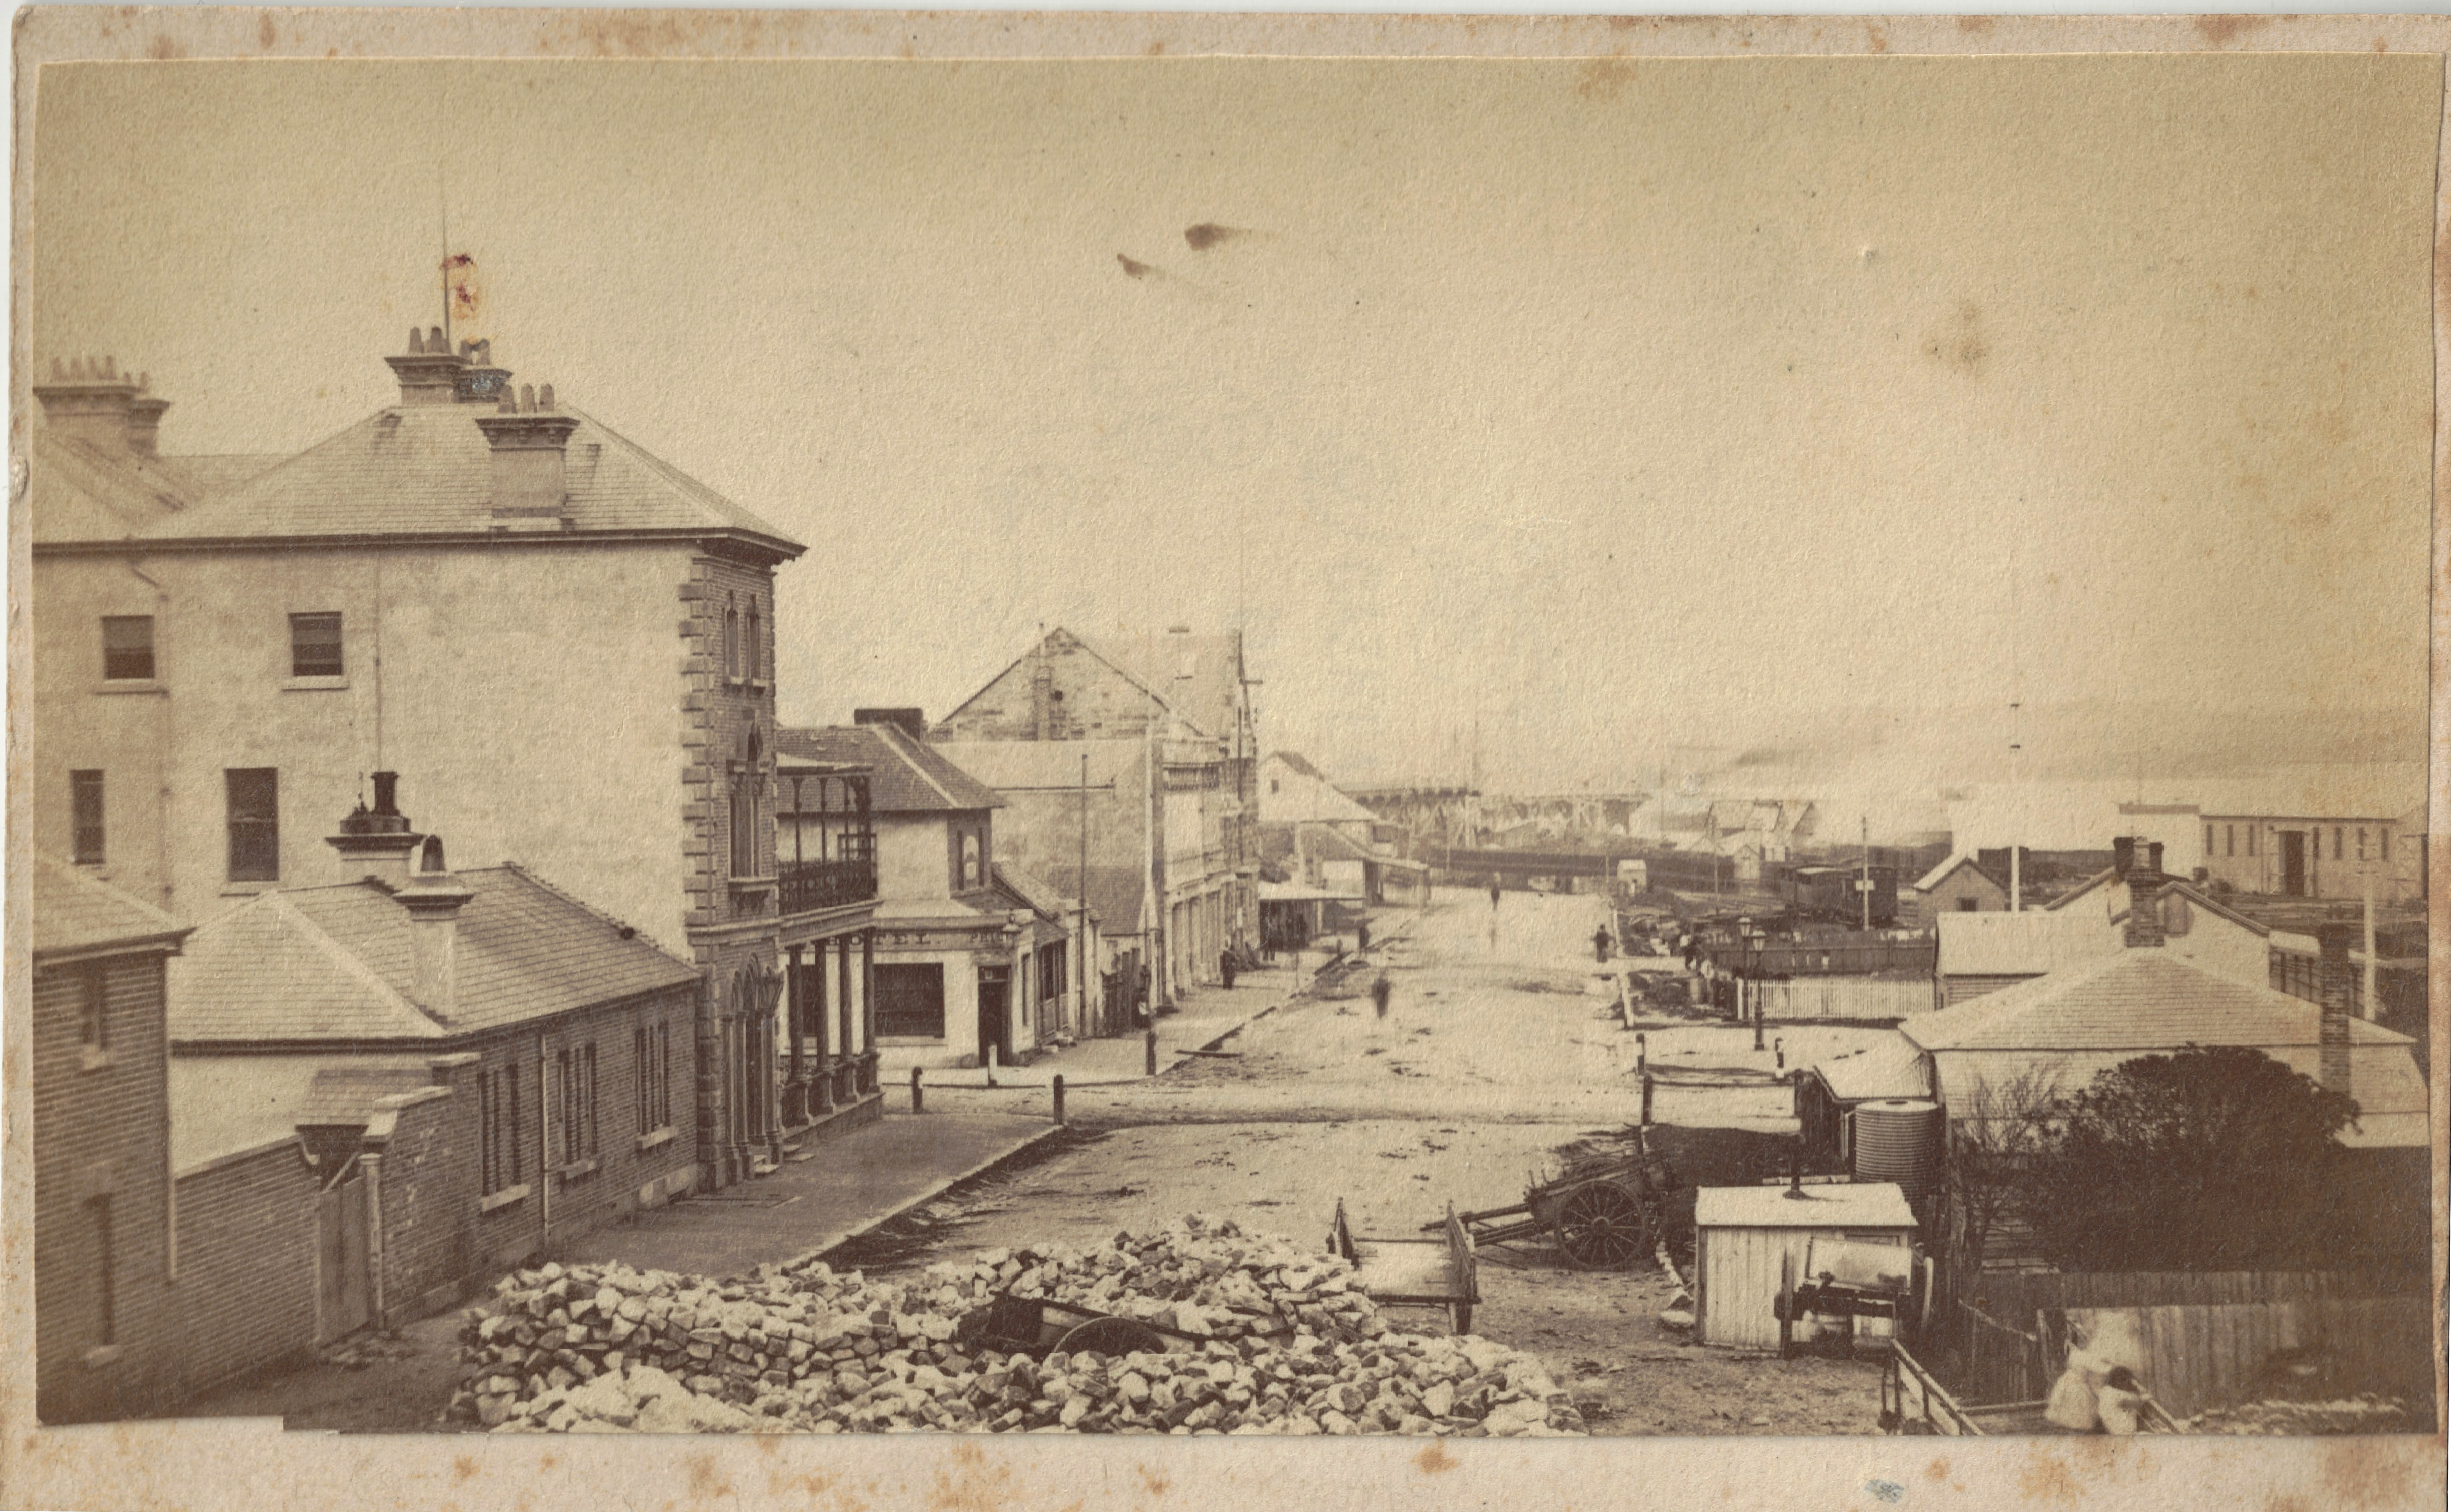 Newcastle Street Scene, circa 22 October 1870 - 1 December 1870 (Photo Credit: Digitised by Anne Glennie from Glennie Family Albums) Click for larger view